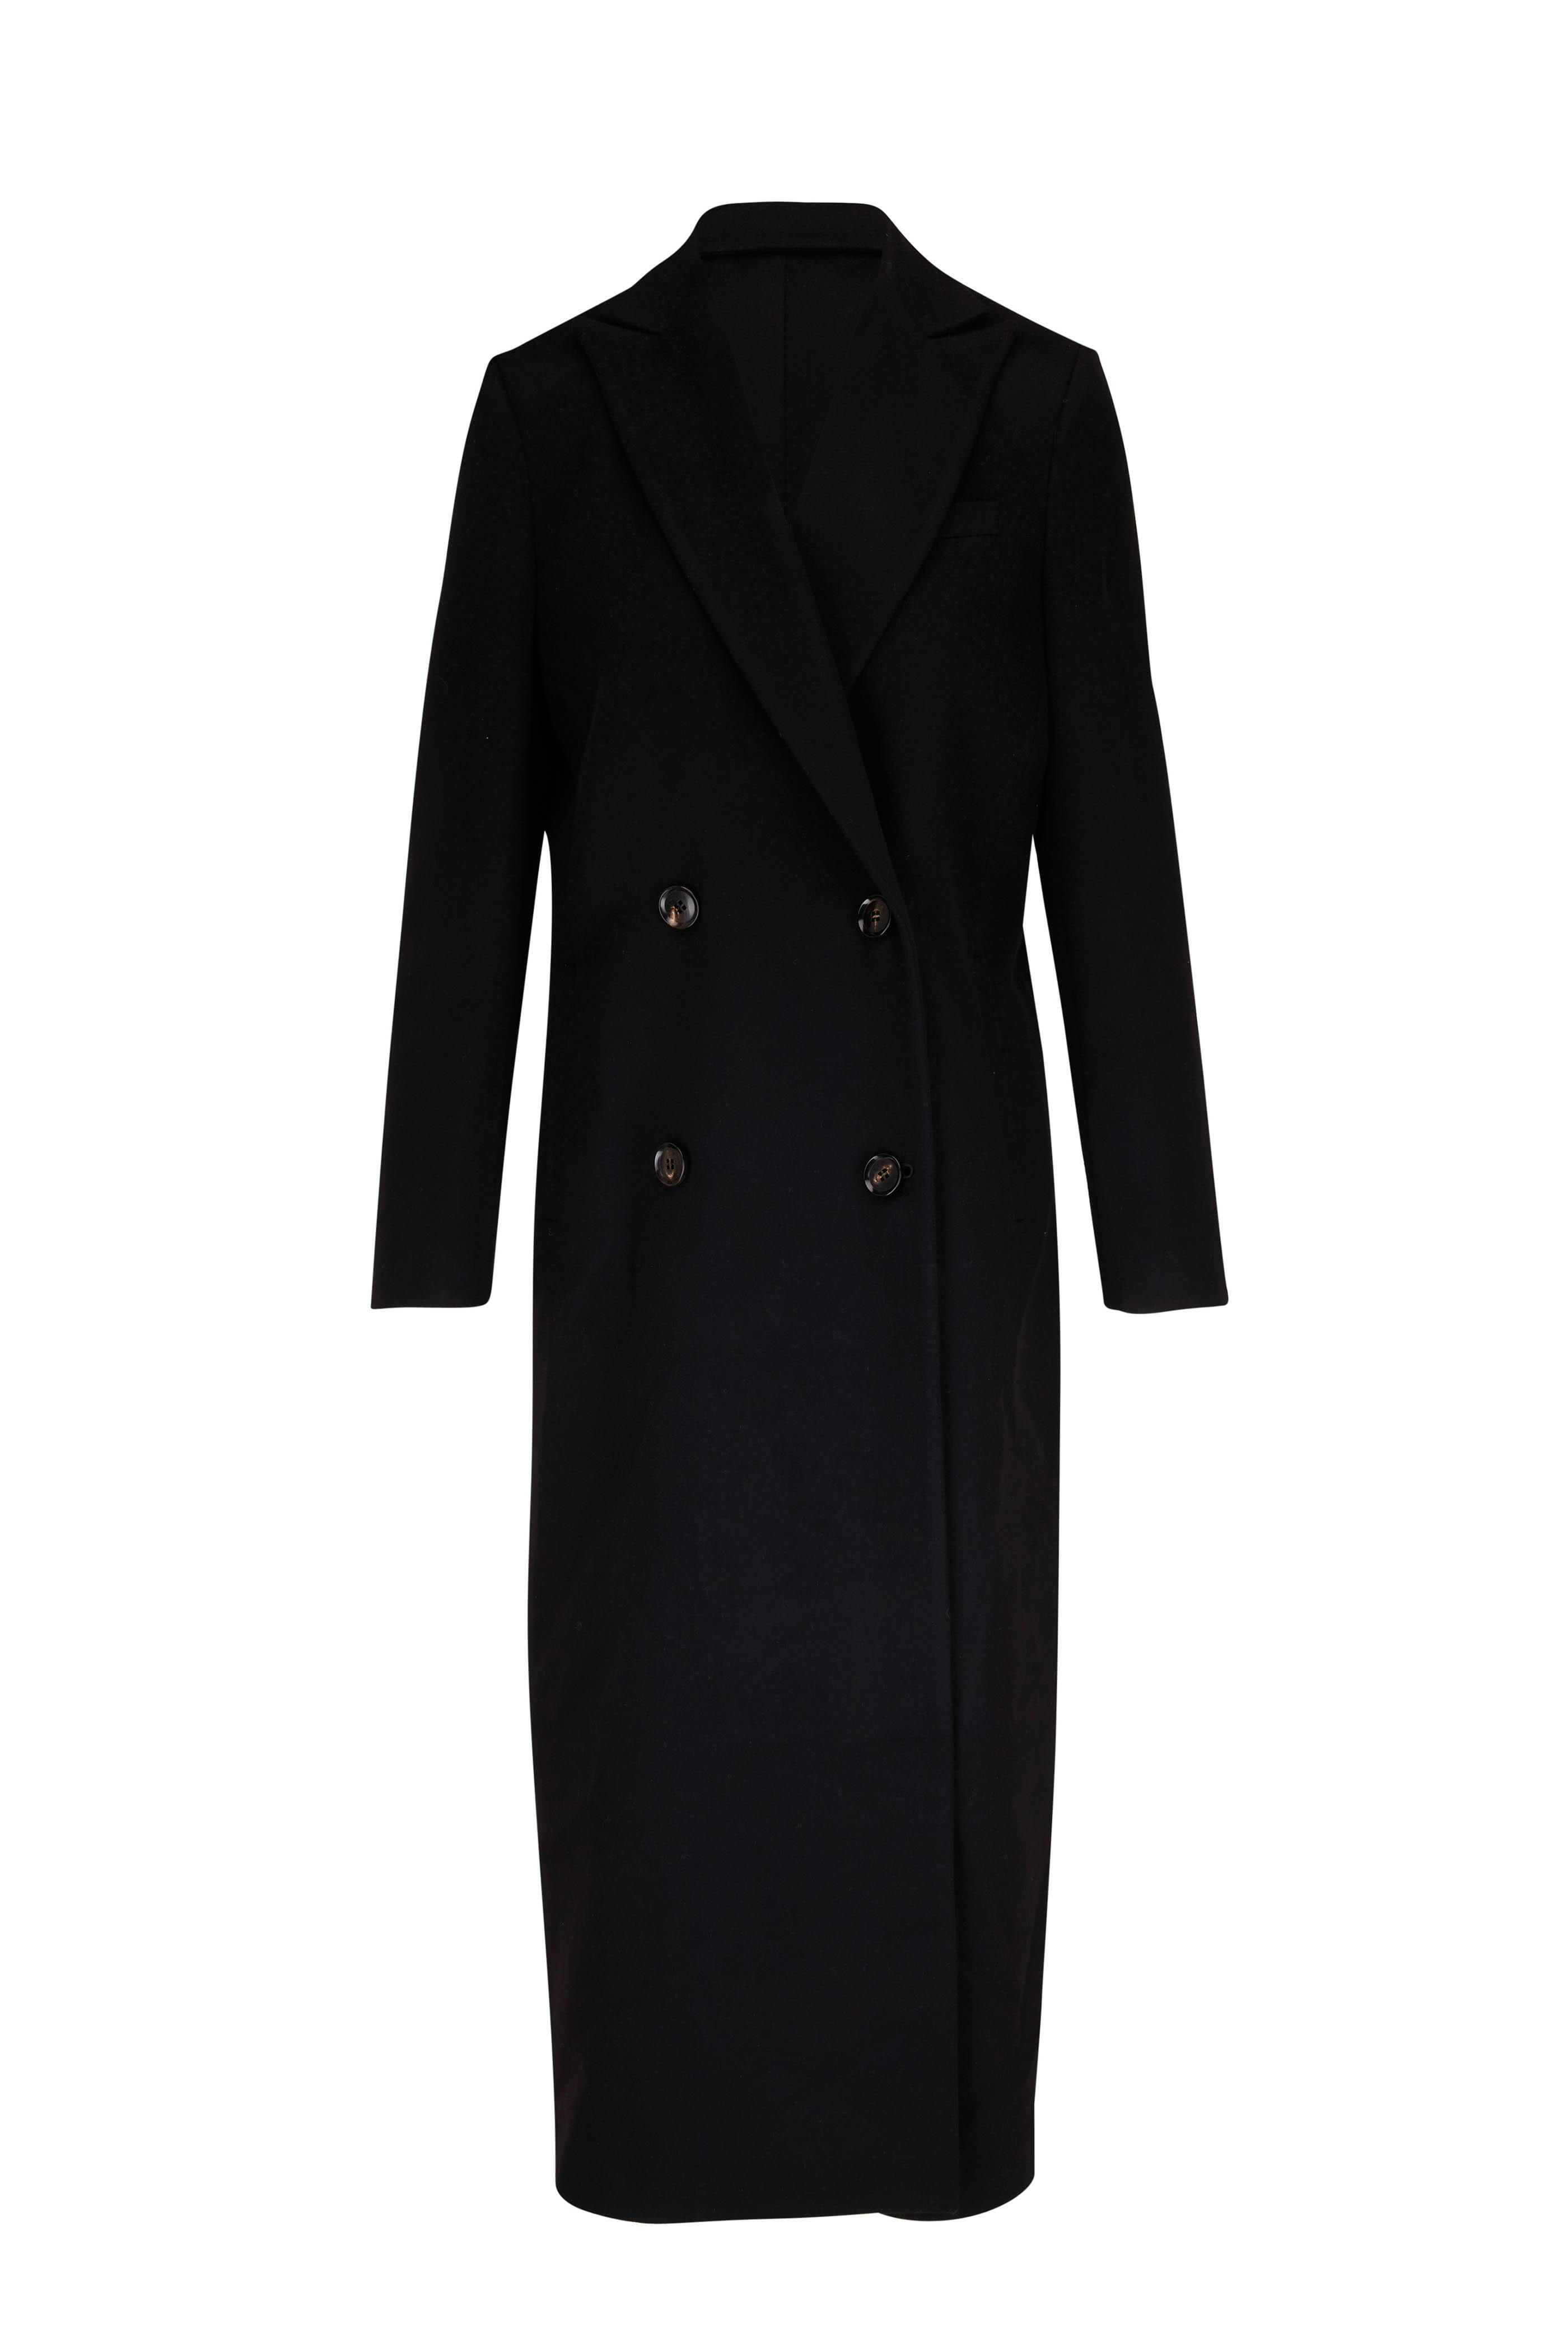 Kiton - Black Double Breasted Long Coat | Mitchell Stores